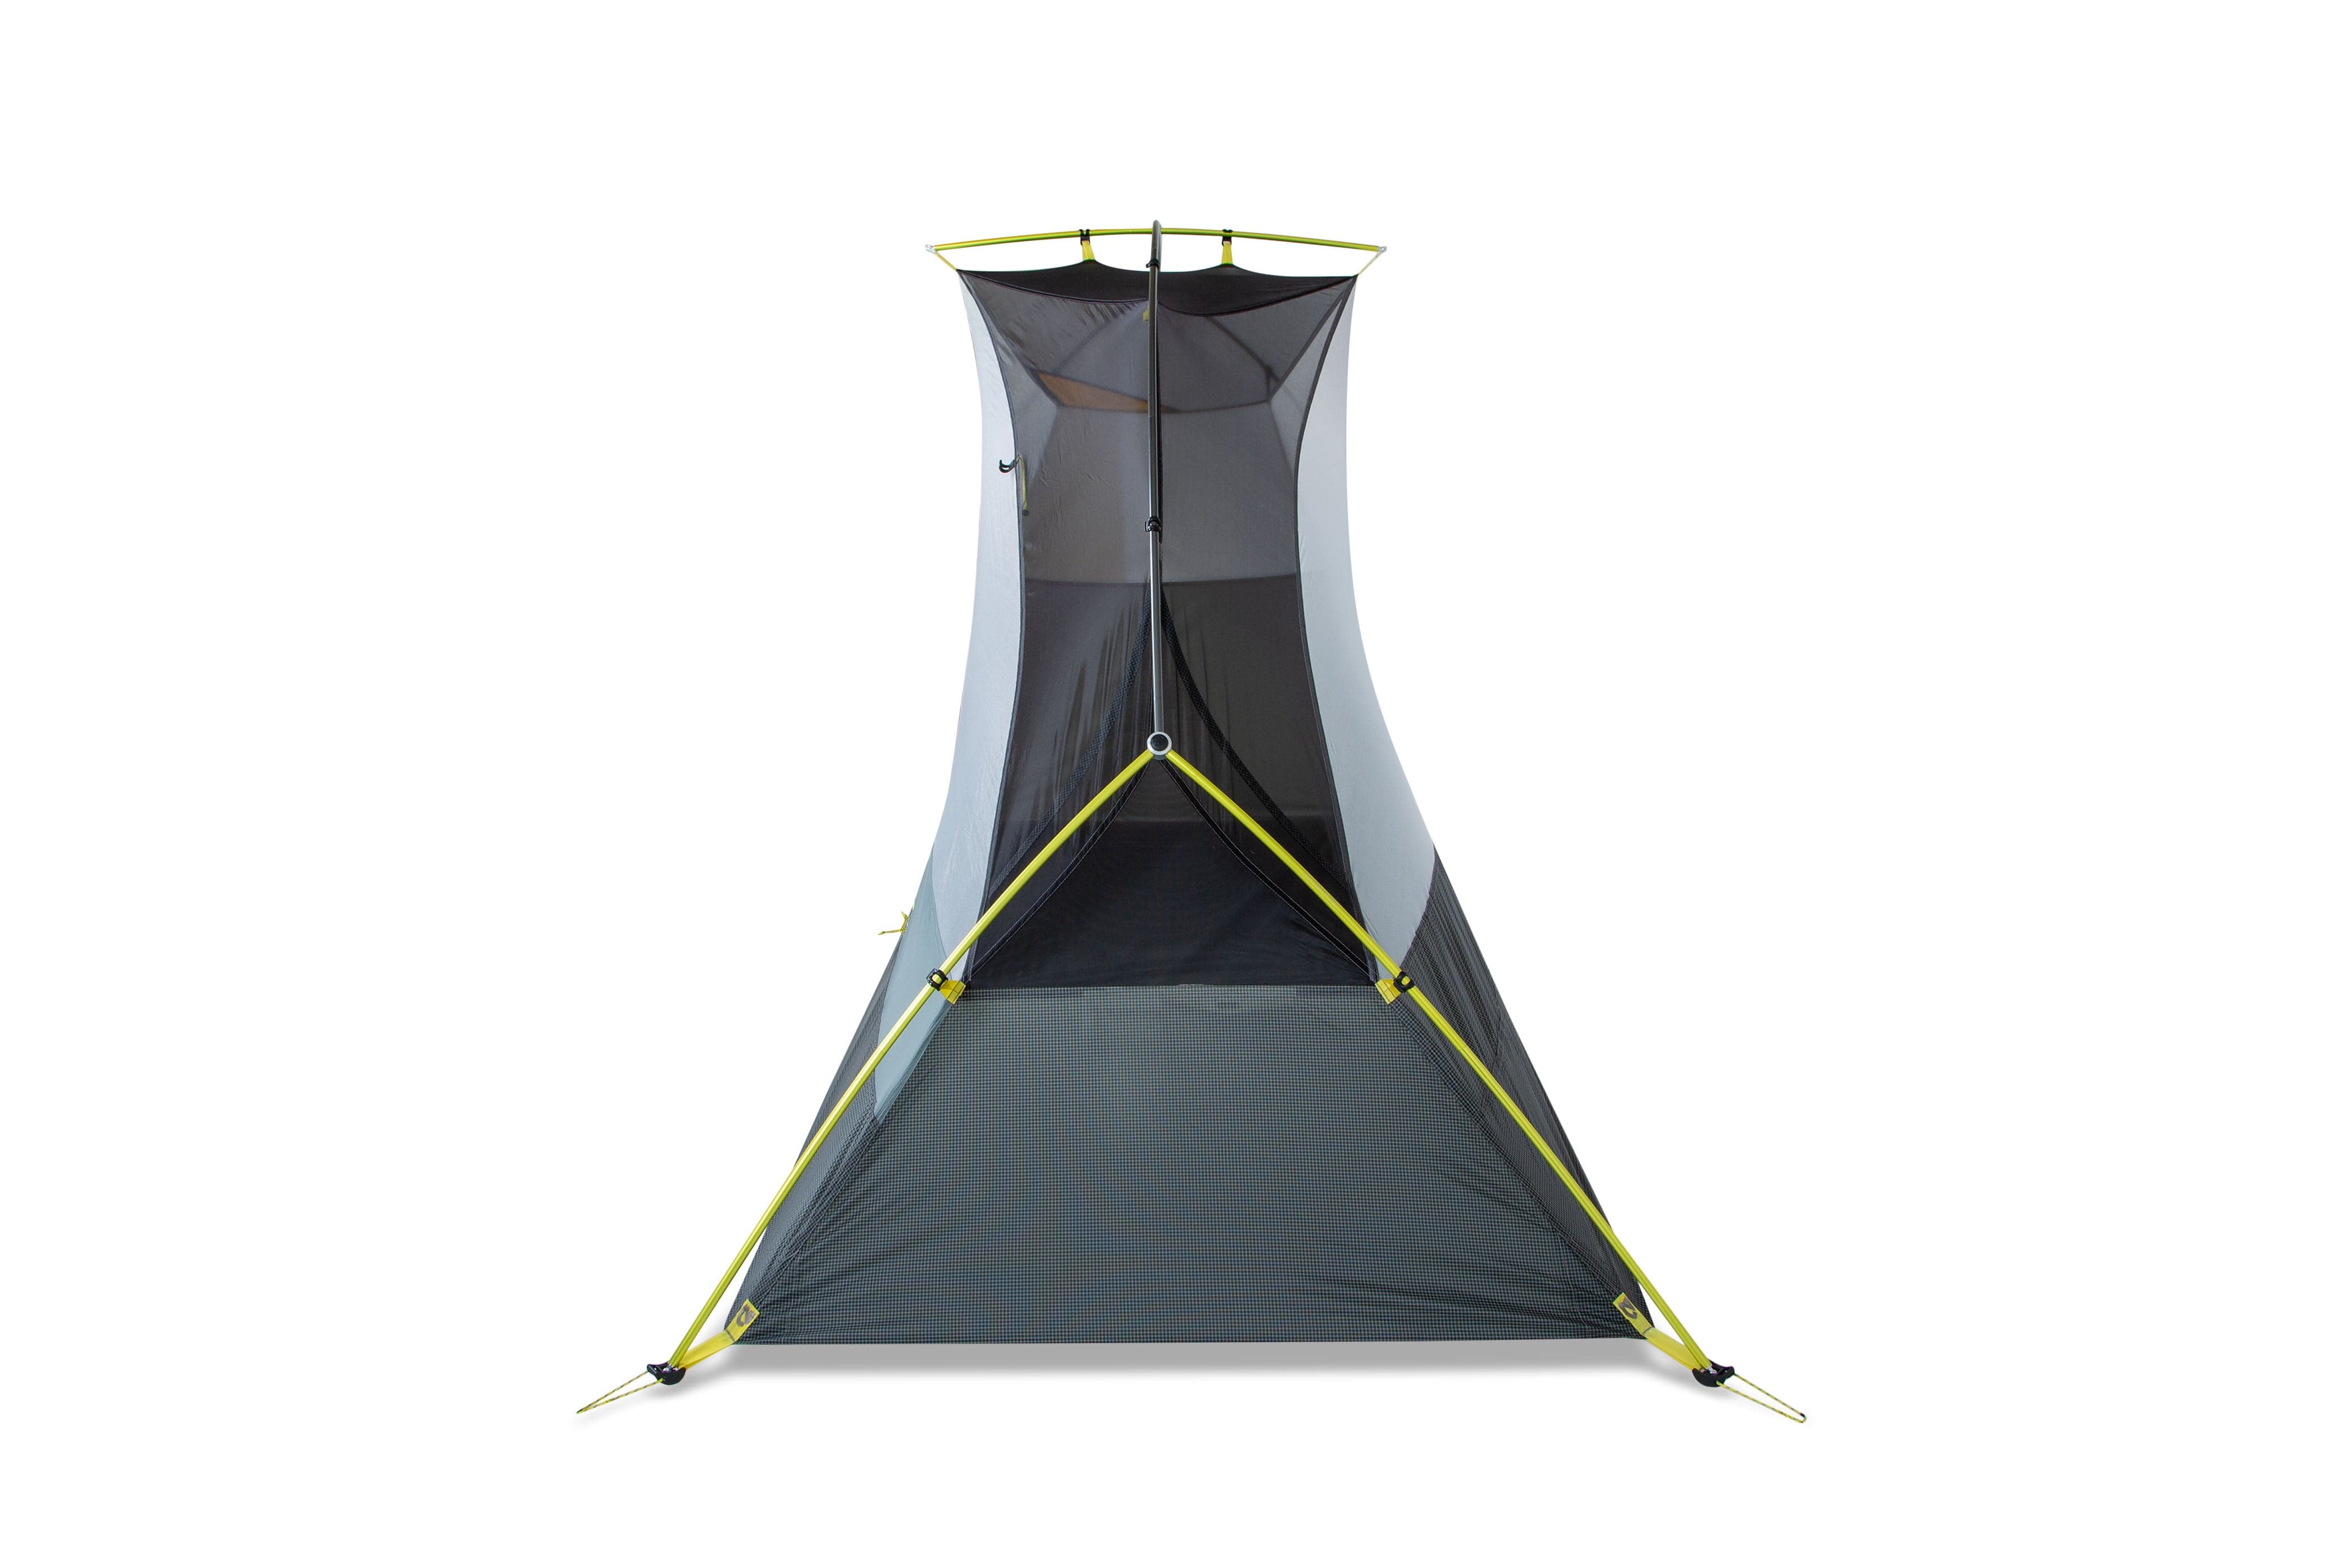 Nemo Tent Dragonfly OSMO Ultralight Backpacking Tent